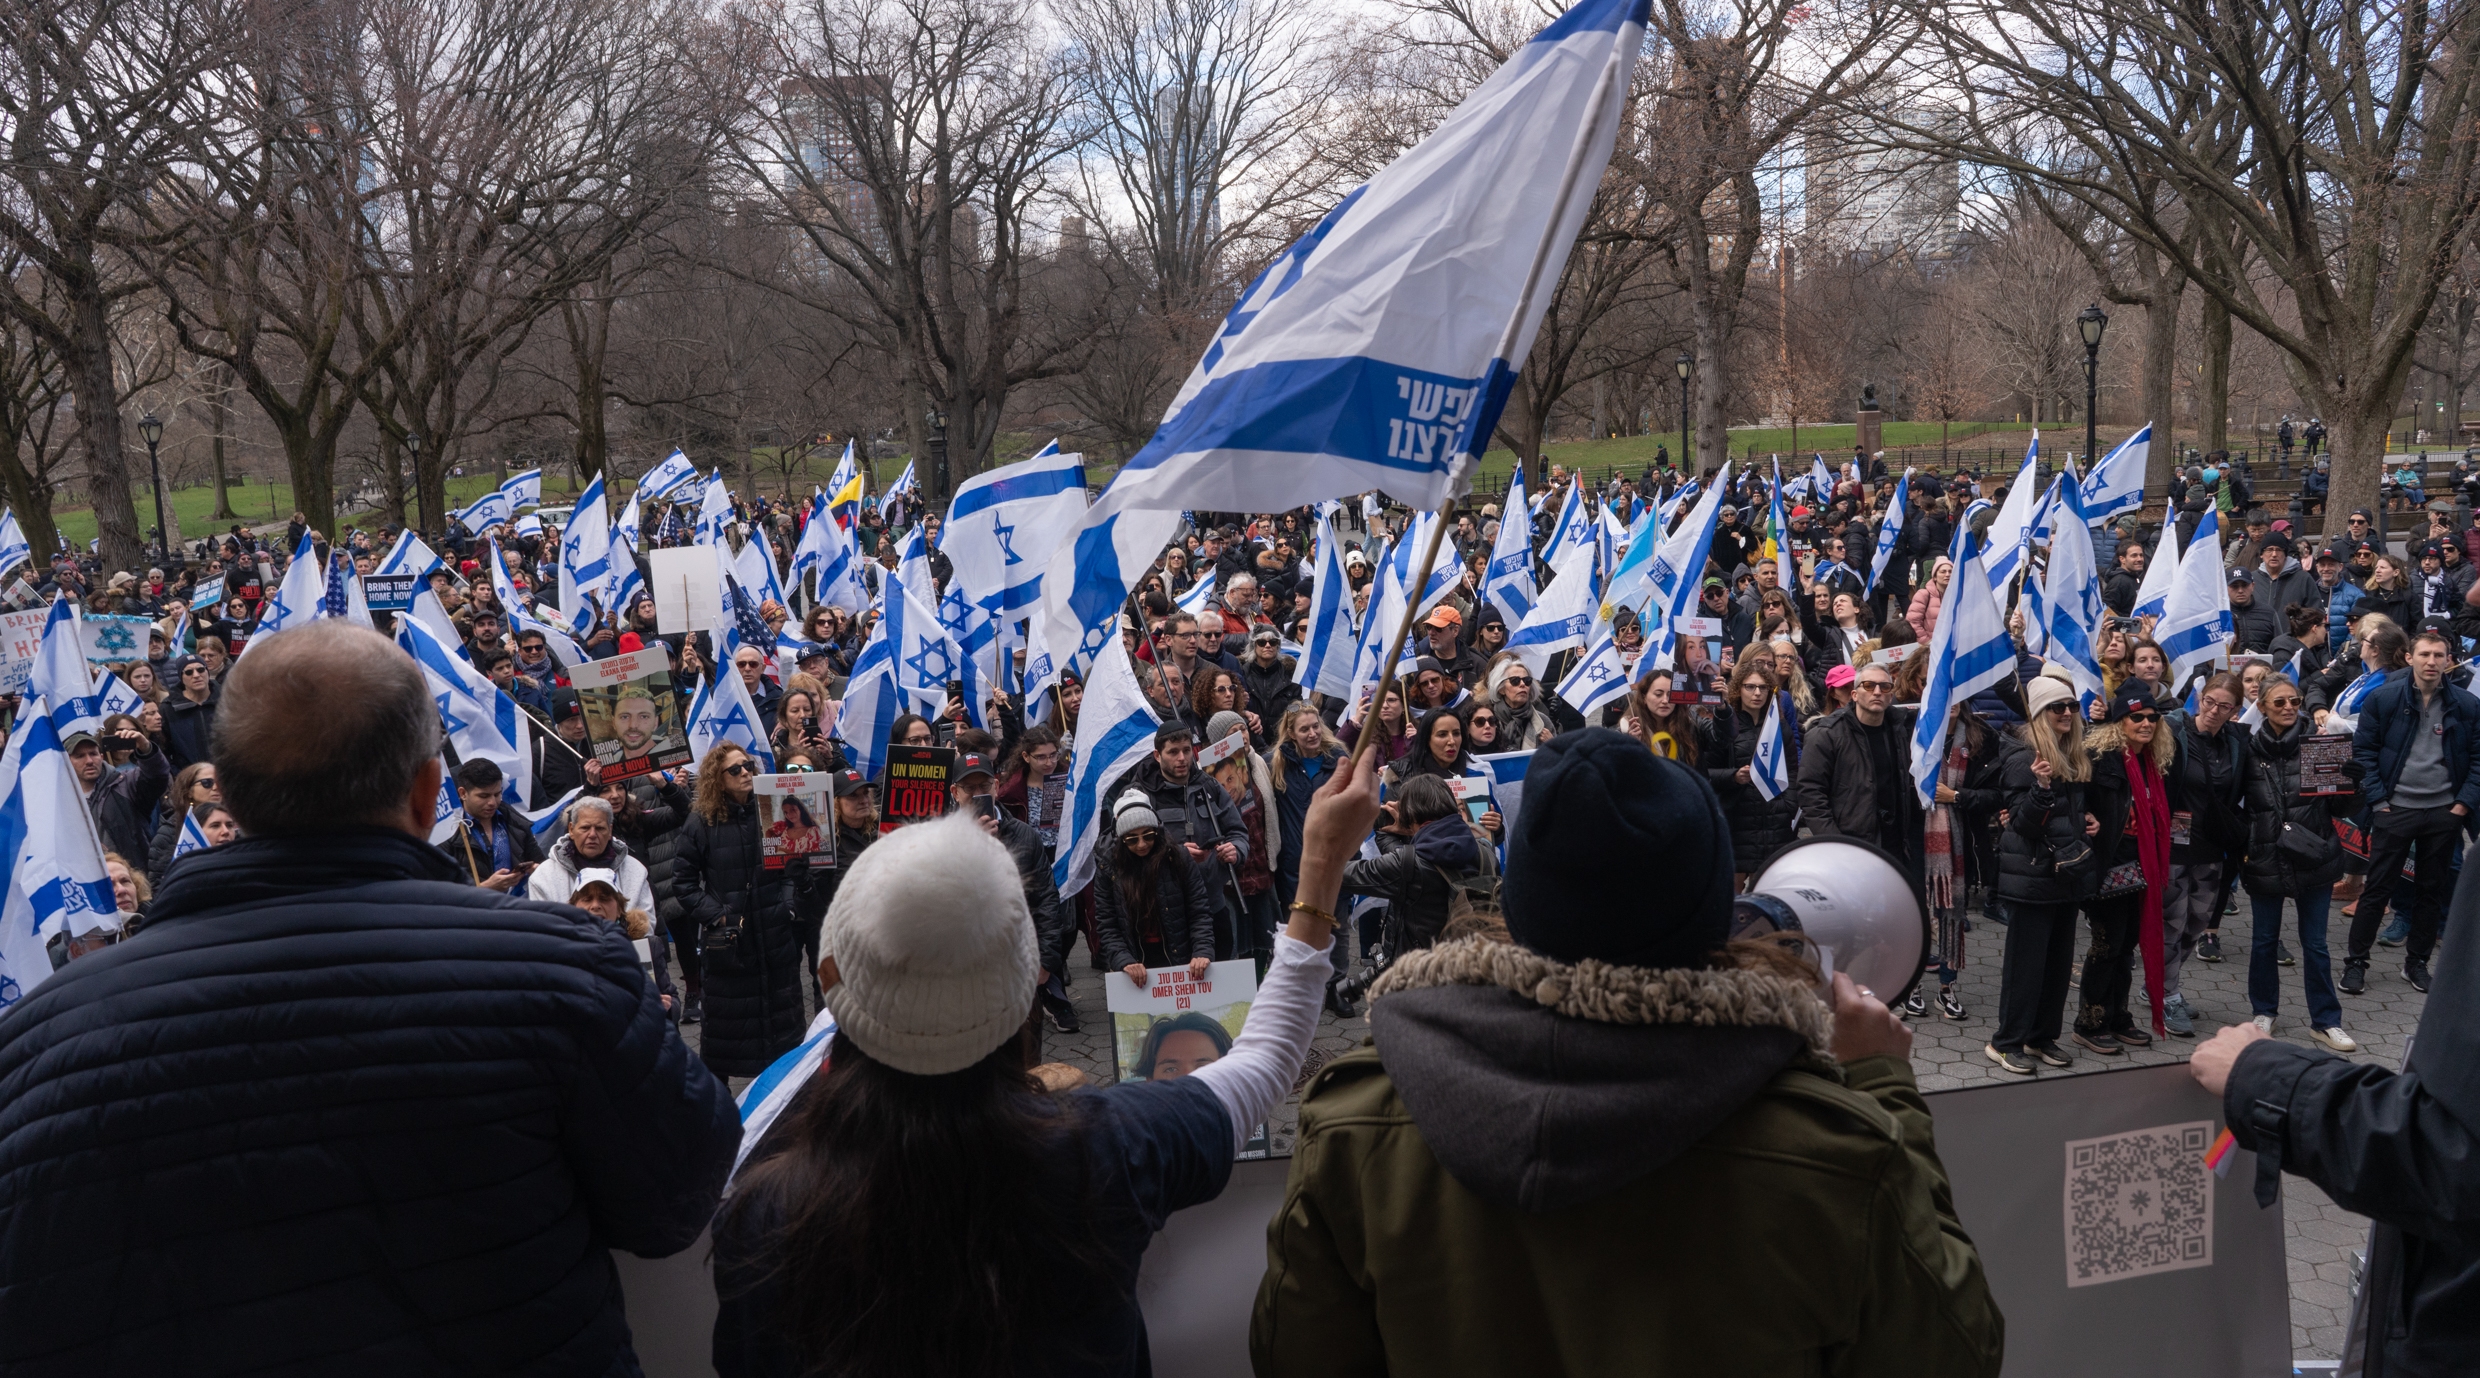 Family members of Hamas hostages lead a crowd at a rally in Central Park, March 10, 2024. (Luke Tress)